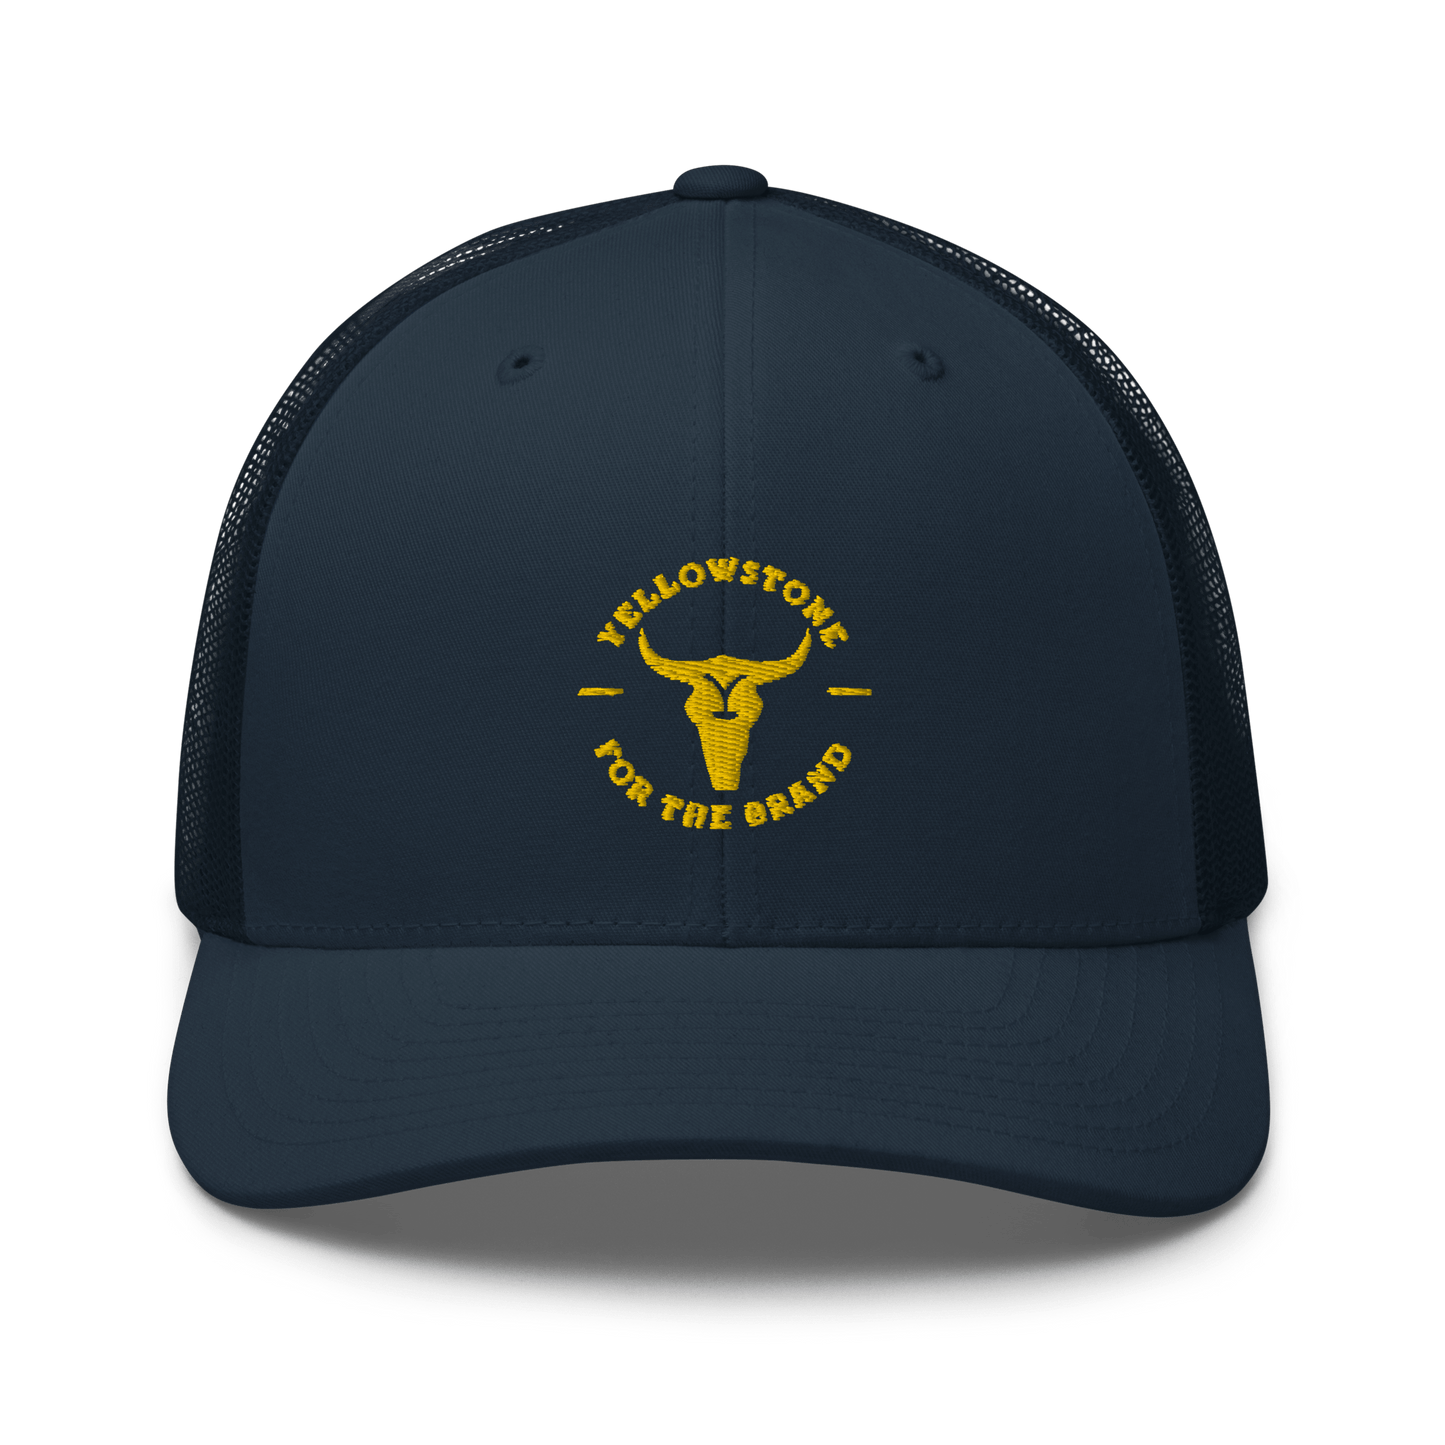 Yellowstone For the Brand Trucker Hat - Paramount Shop